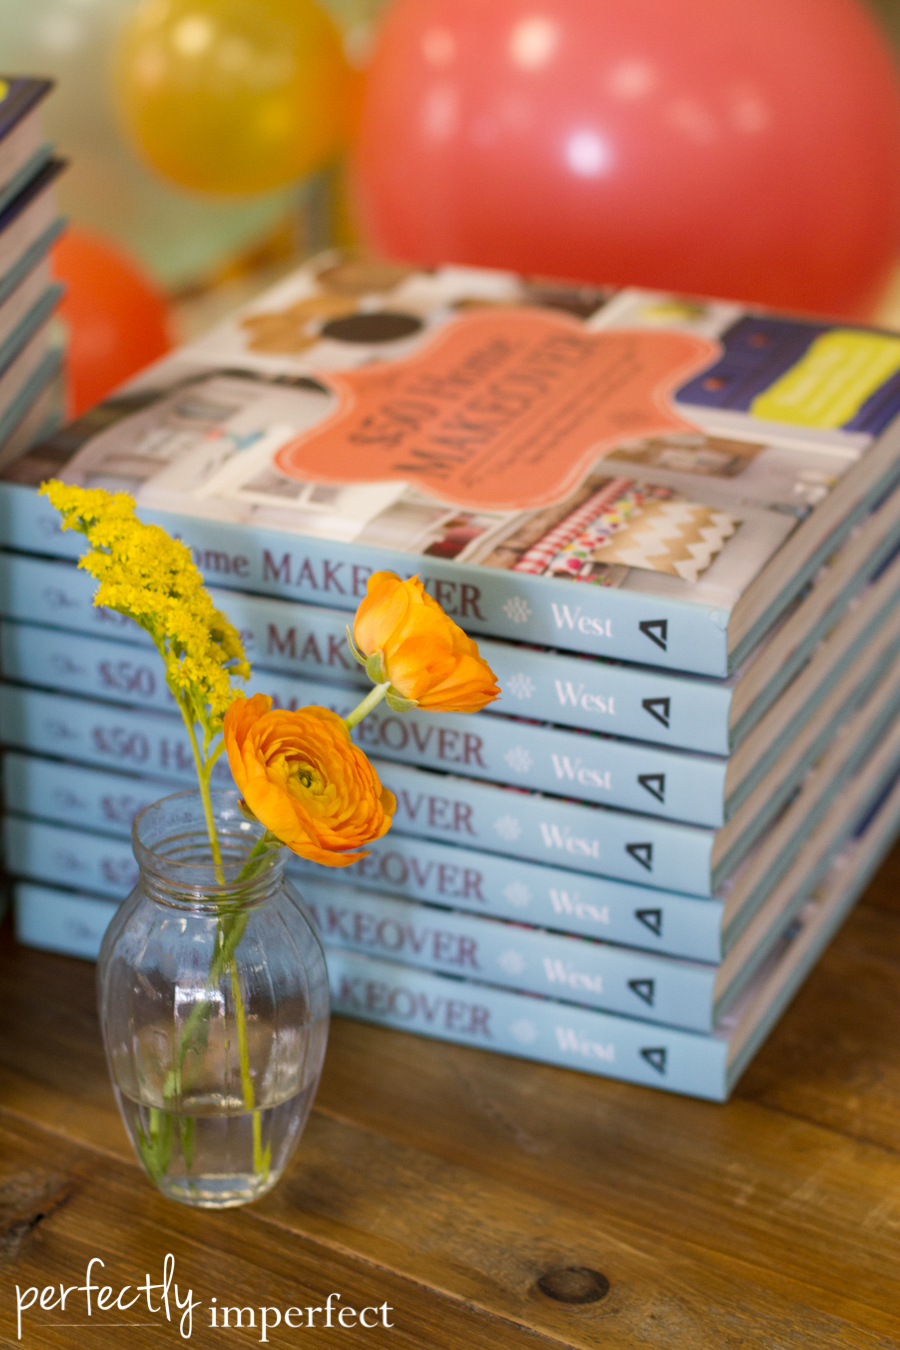 Perfectly Imperfect The $50 Home Makeover Book Launch Party-8